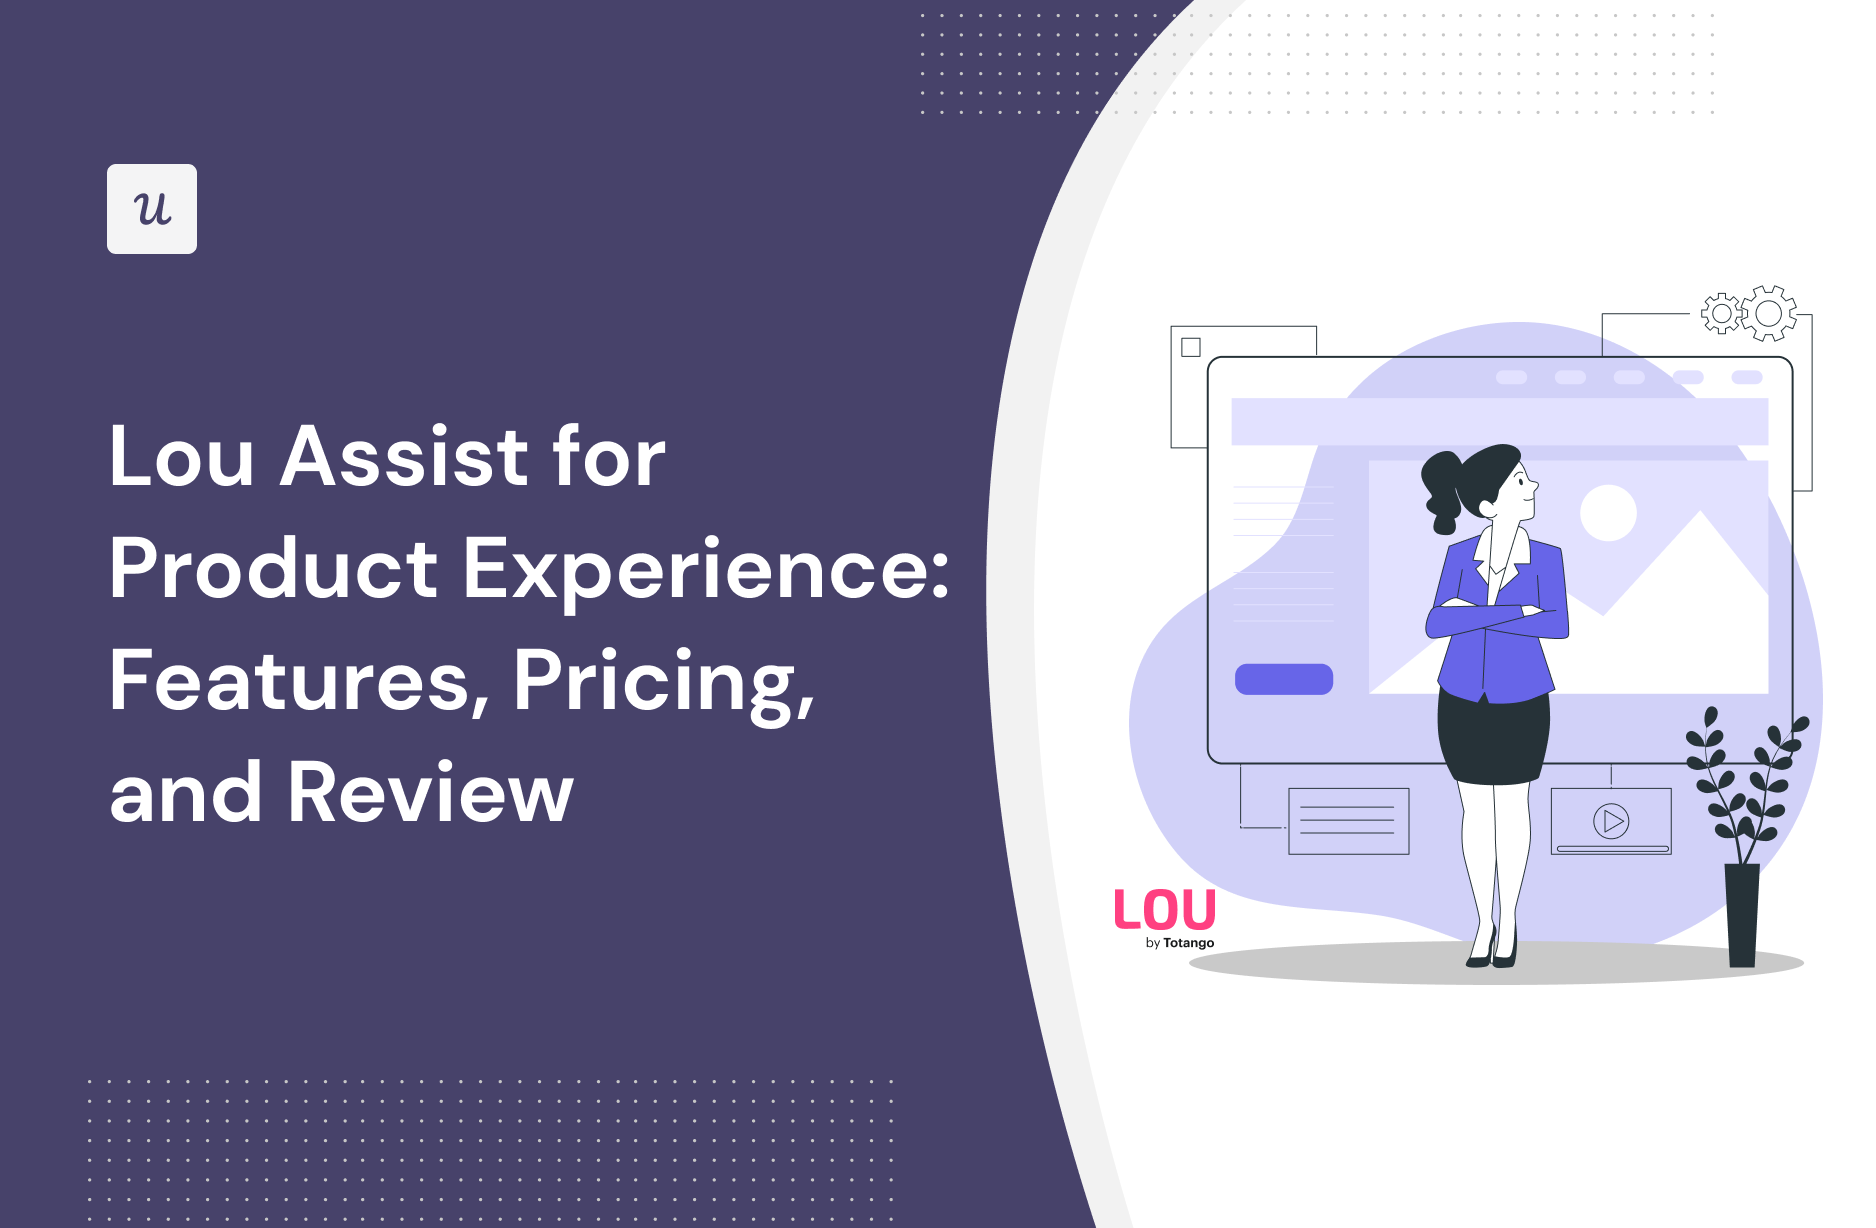 Lou Assist for Product experience: Features, Pricing, and Review